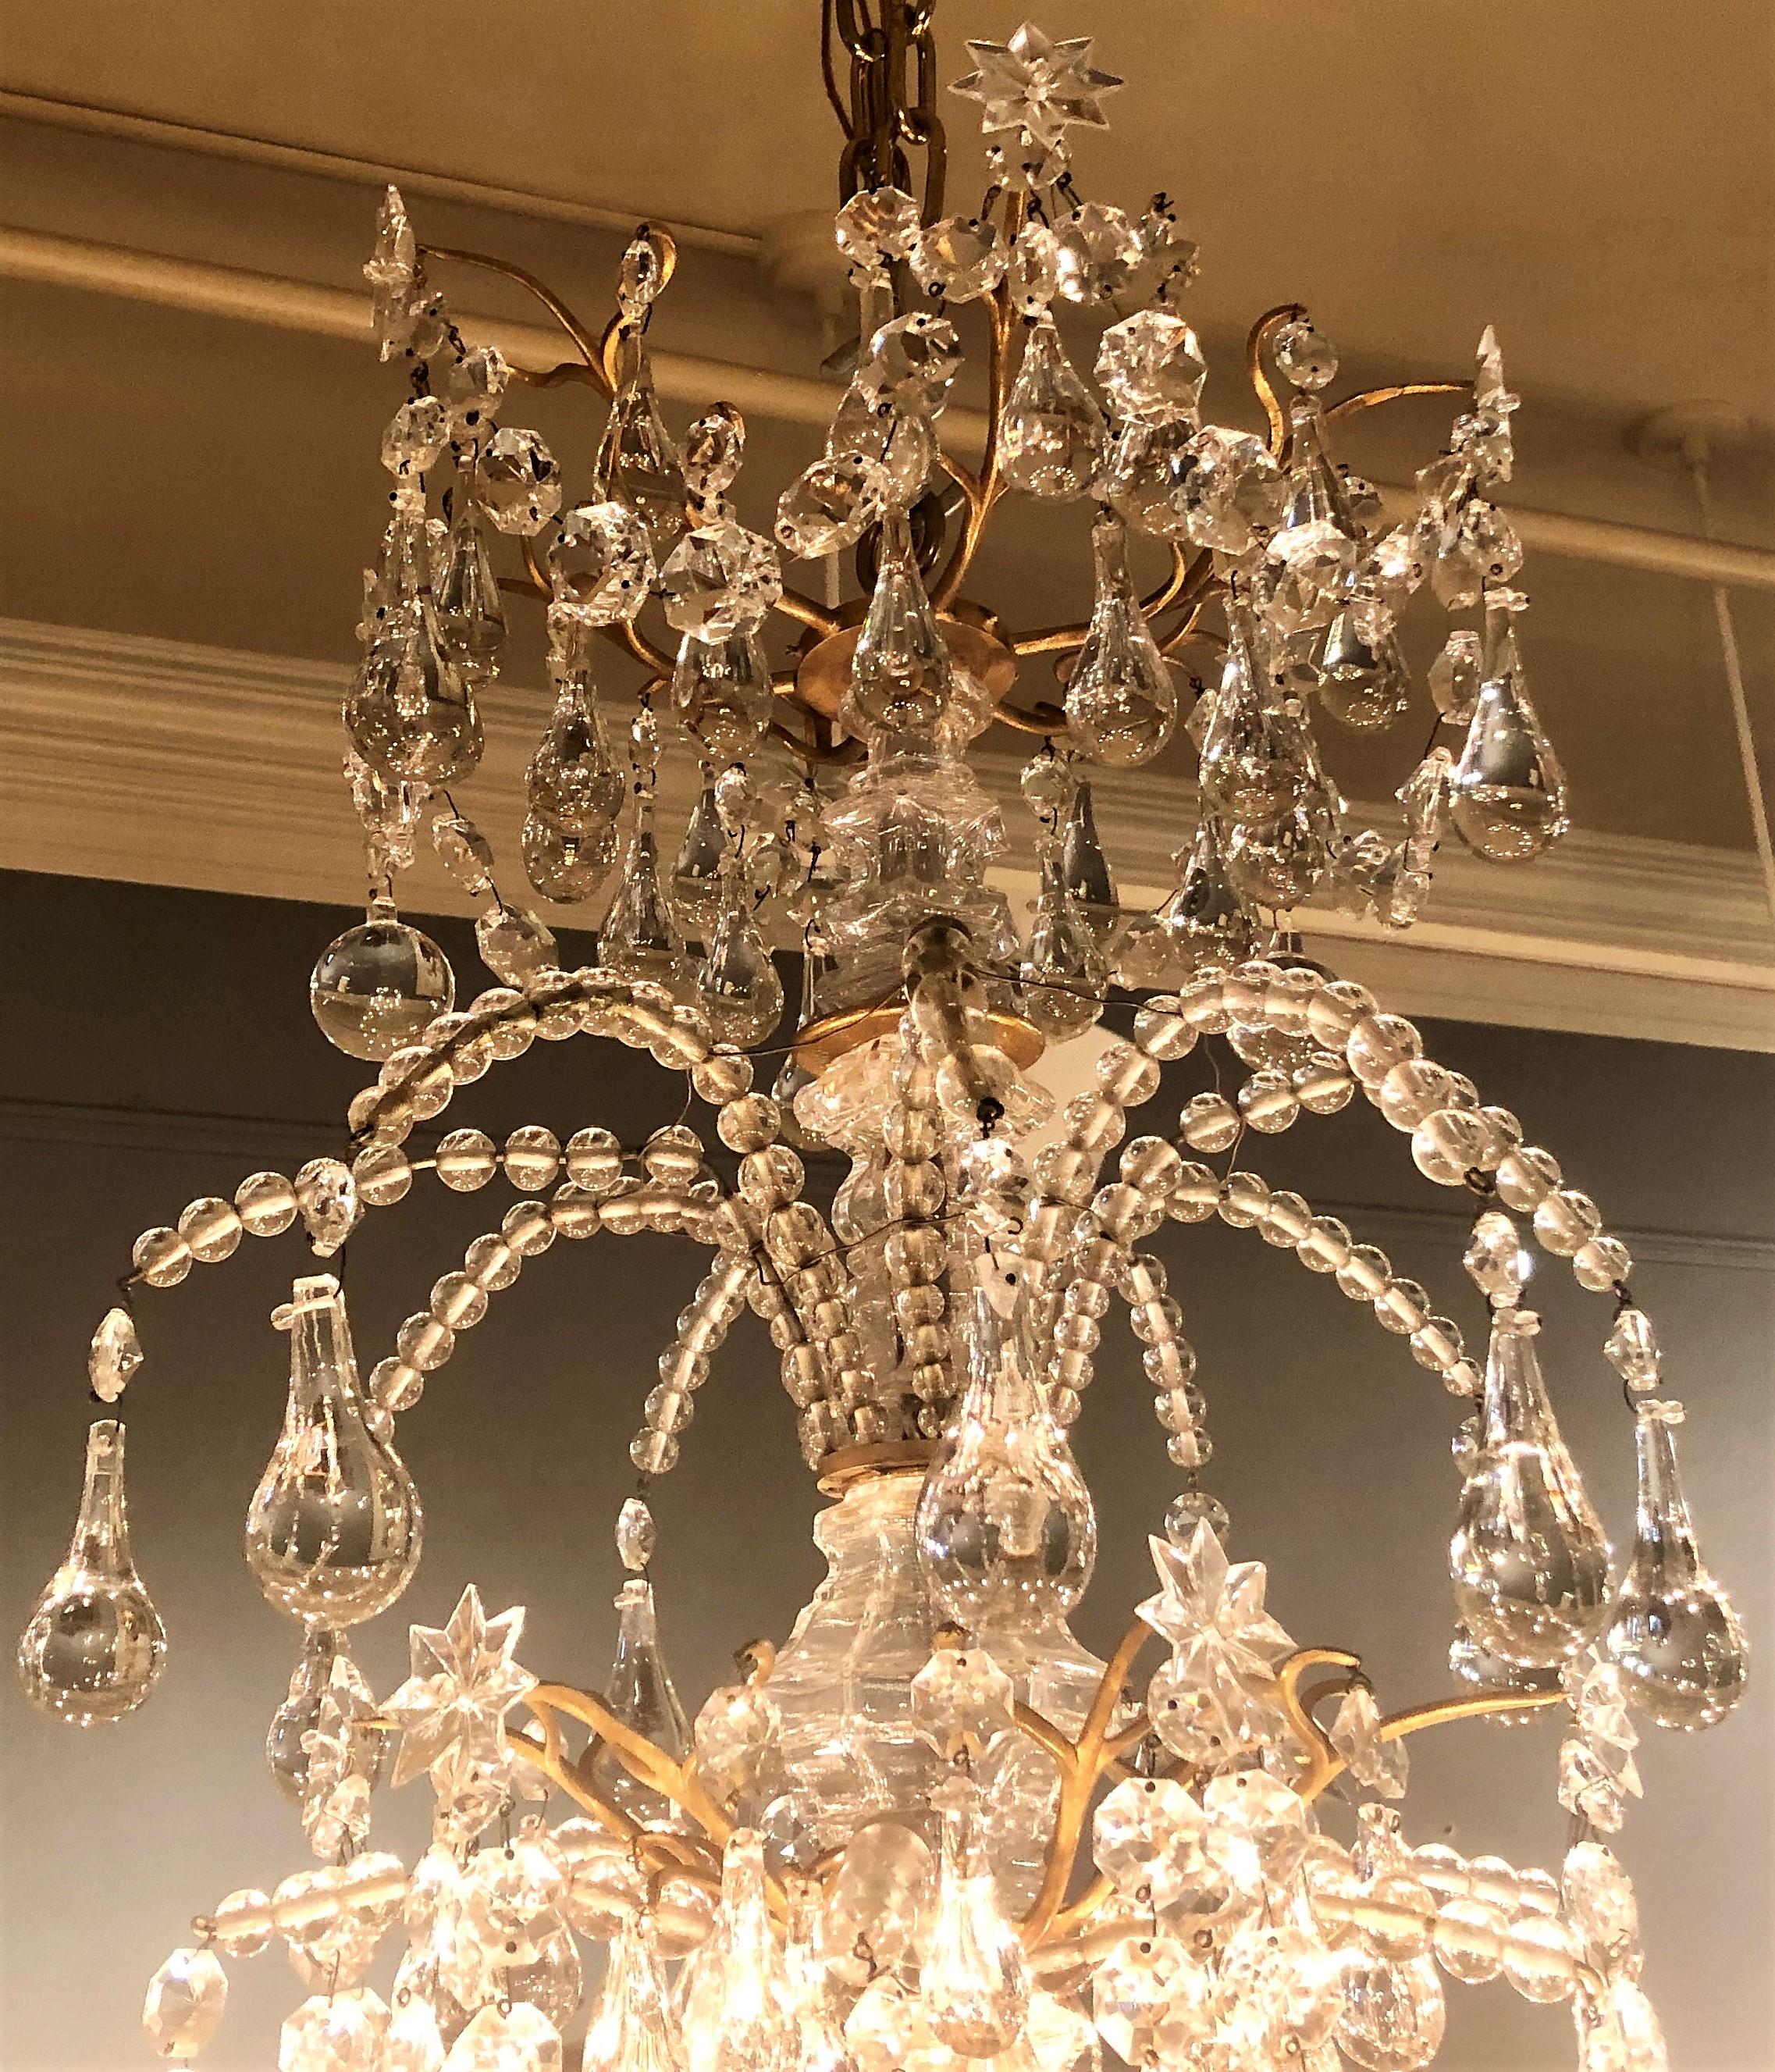 Antique French original baccarat crystal and bronze D'Ore chandelier, circa 1875-1895.